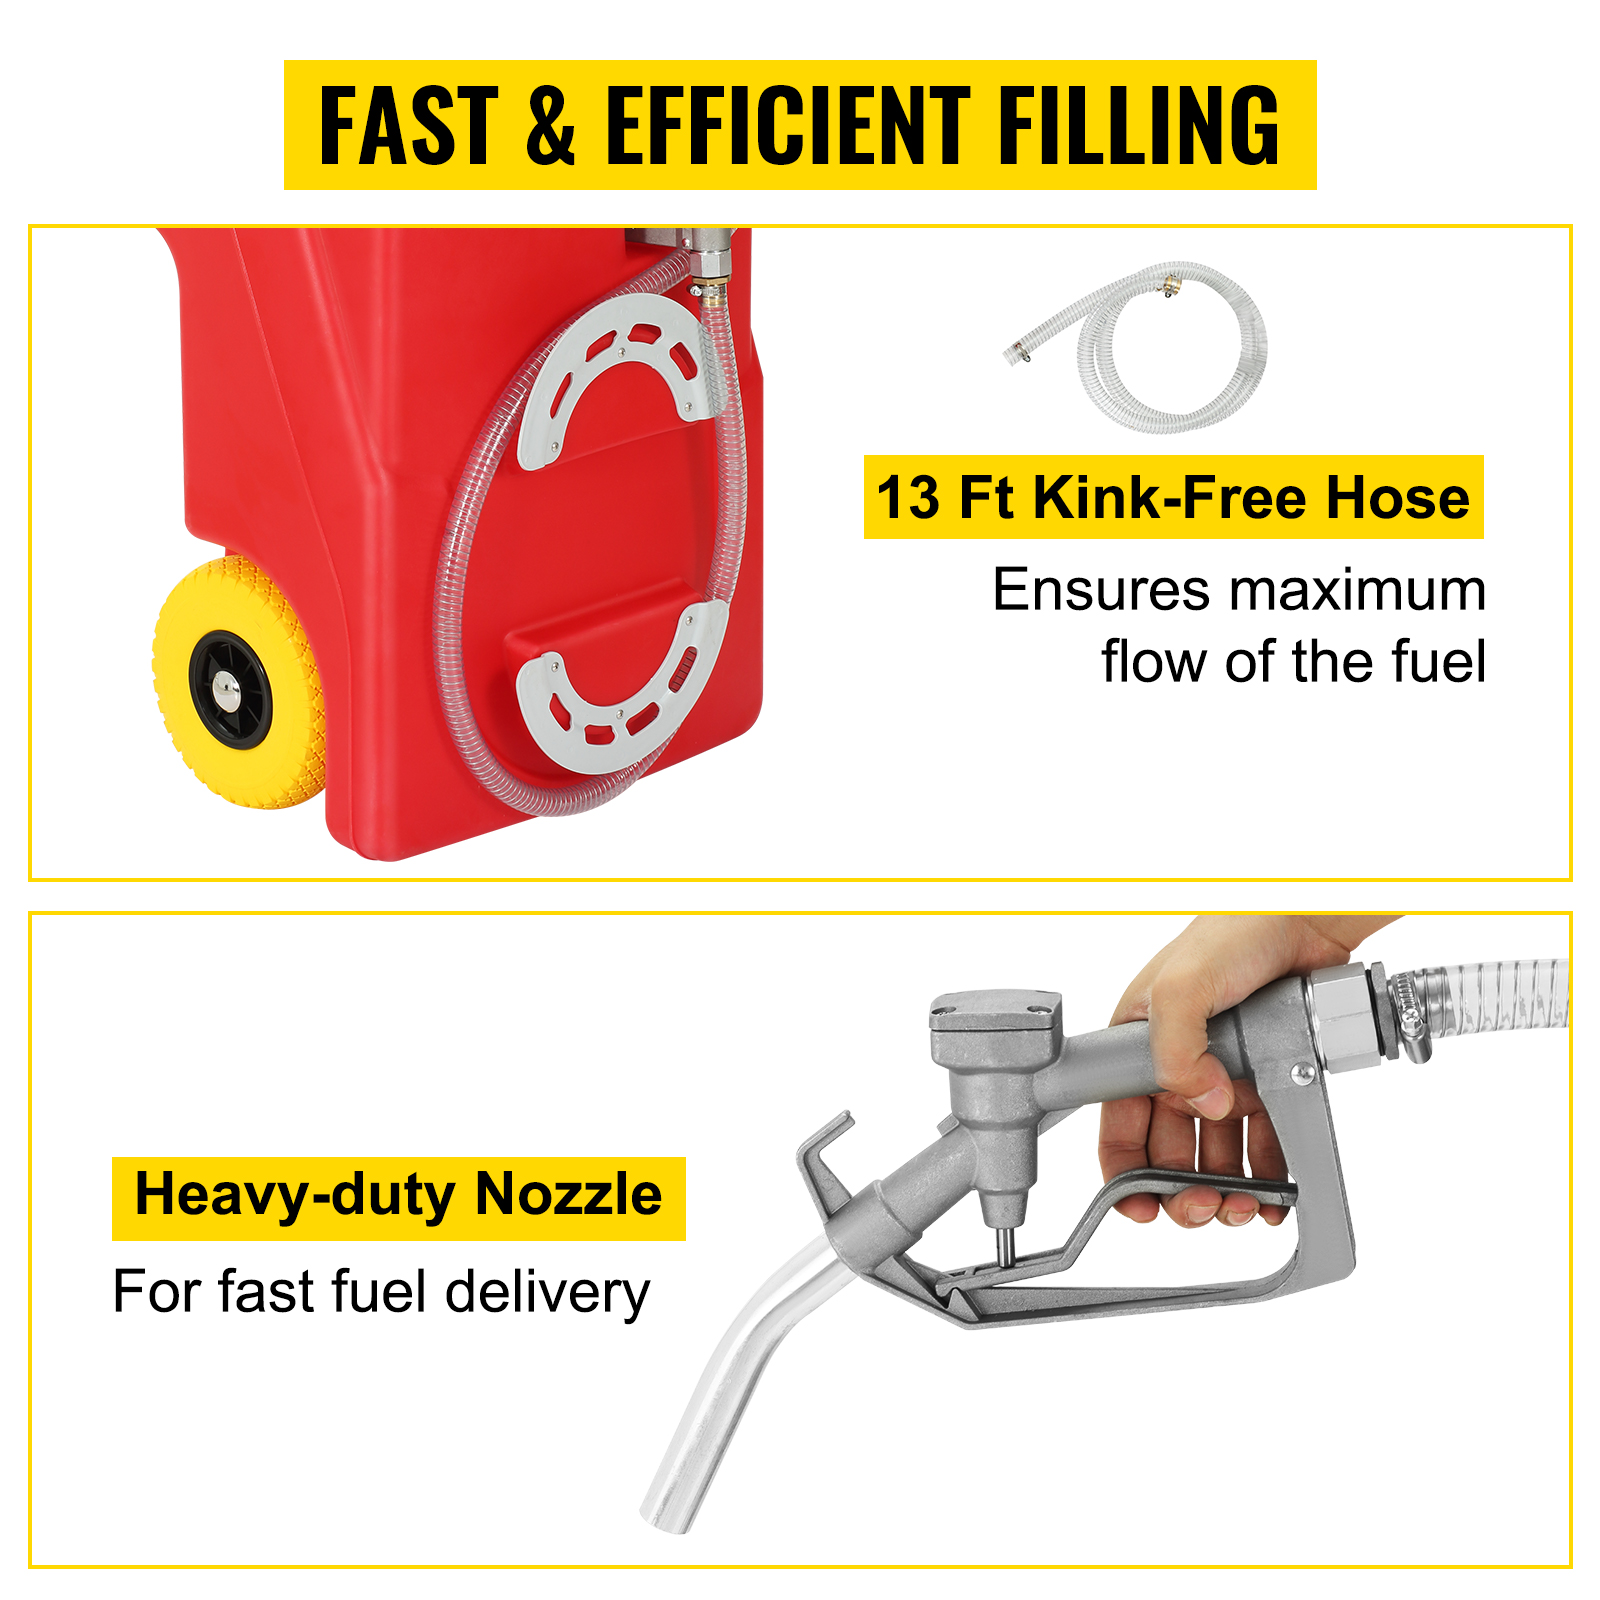 32 Gallon Diesel Fuel Caddy Tank with Pump, Portable Diesel Fuel Tank  On-Wheels with 12V 10GPM Electric Transfer Pump, Hose and Nozzle for Trucks